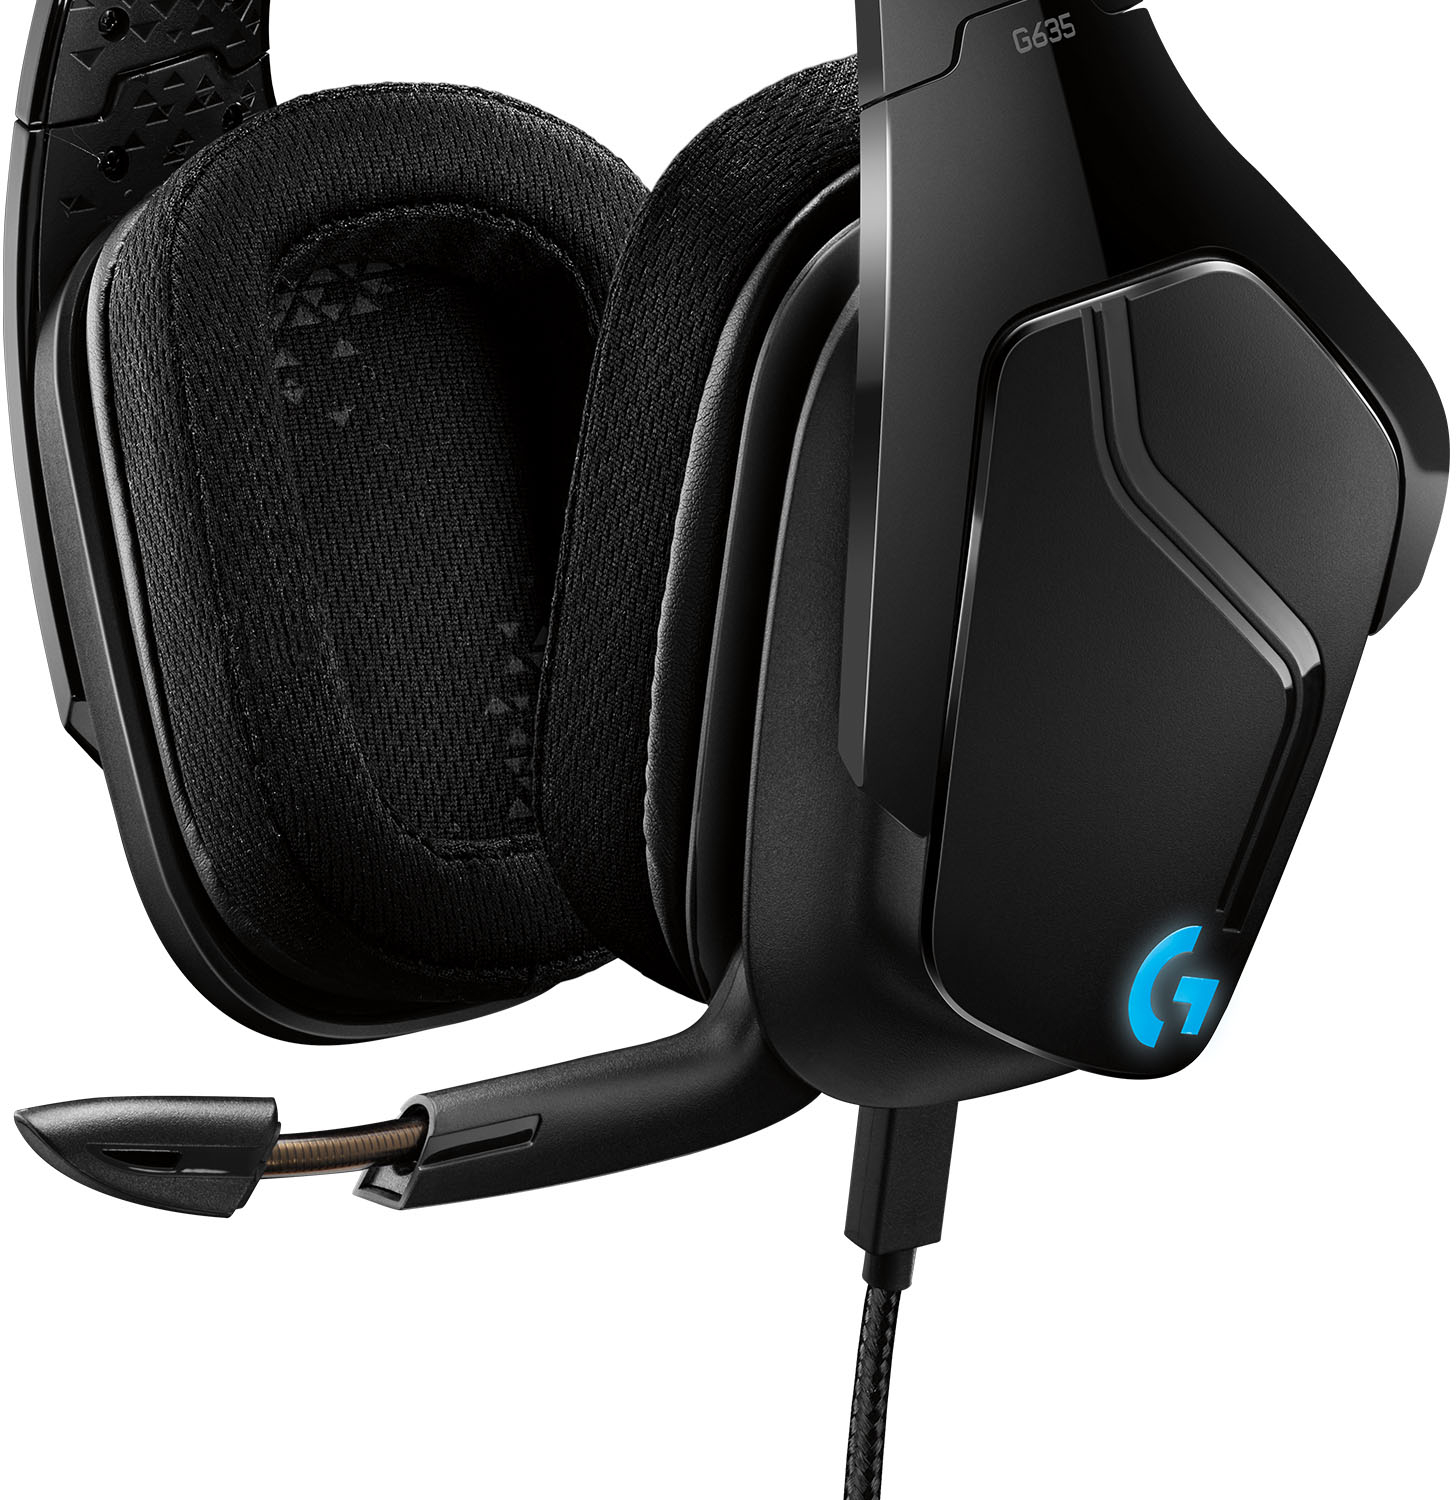 akavet celle Violin Logitech G635 Wired 7.1 Surround Sound Over-the-Ear Gaming Headset for PC  with LIGHTSYNC RGB Lighting Black/Blue 981-000748 - Best Buy